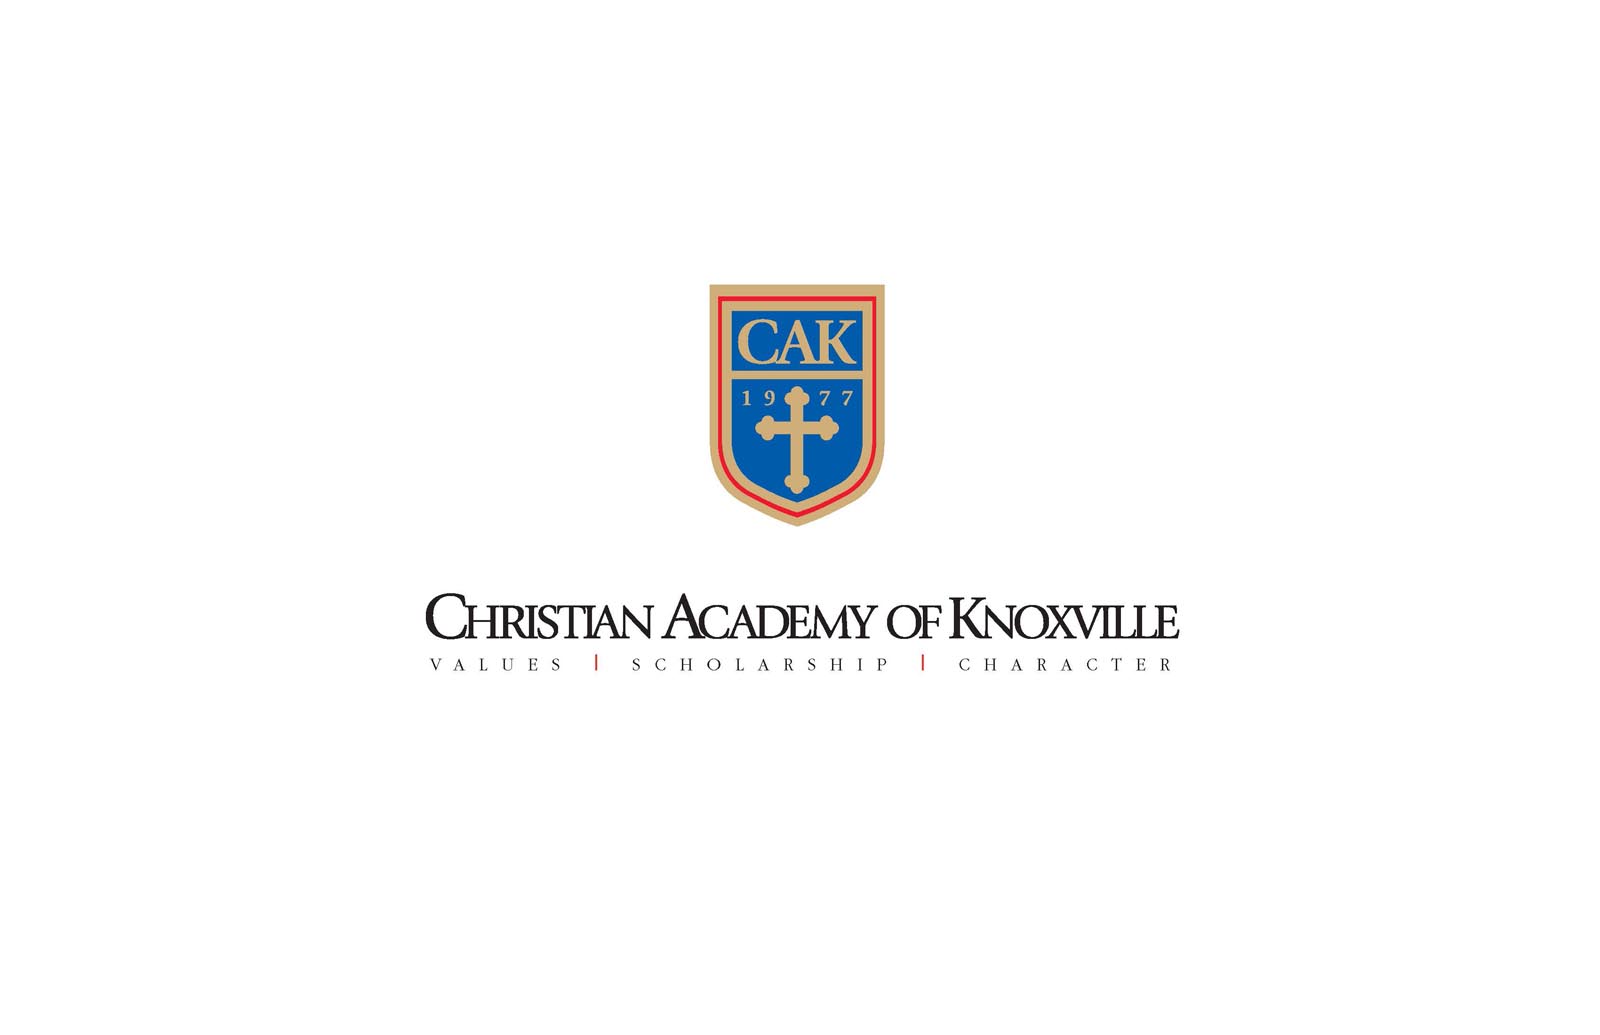 Christian Academy of Knoxville